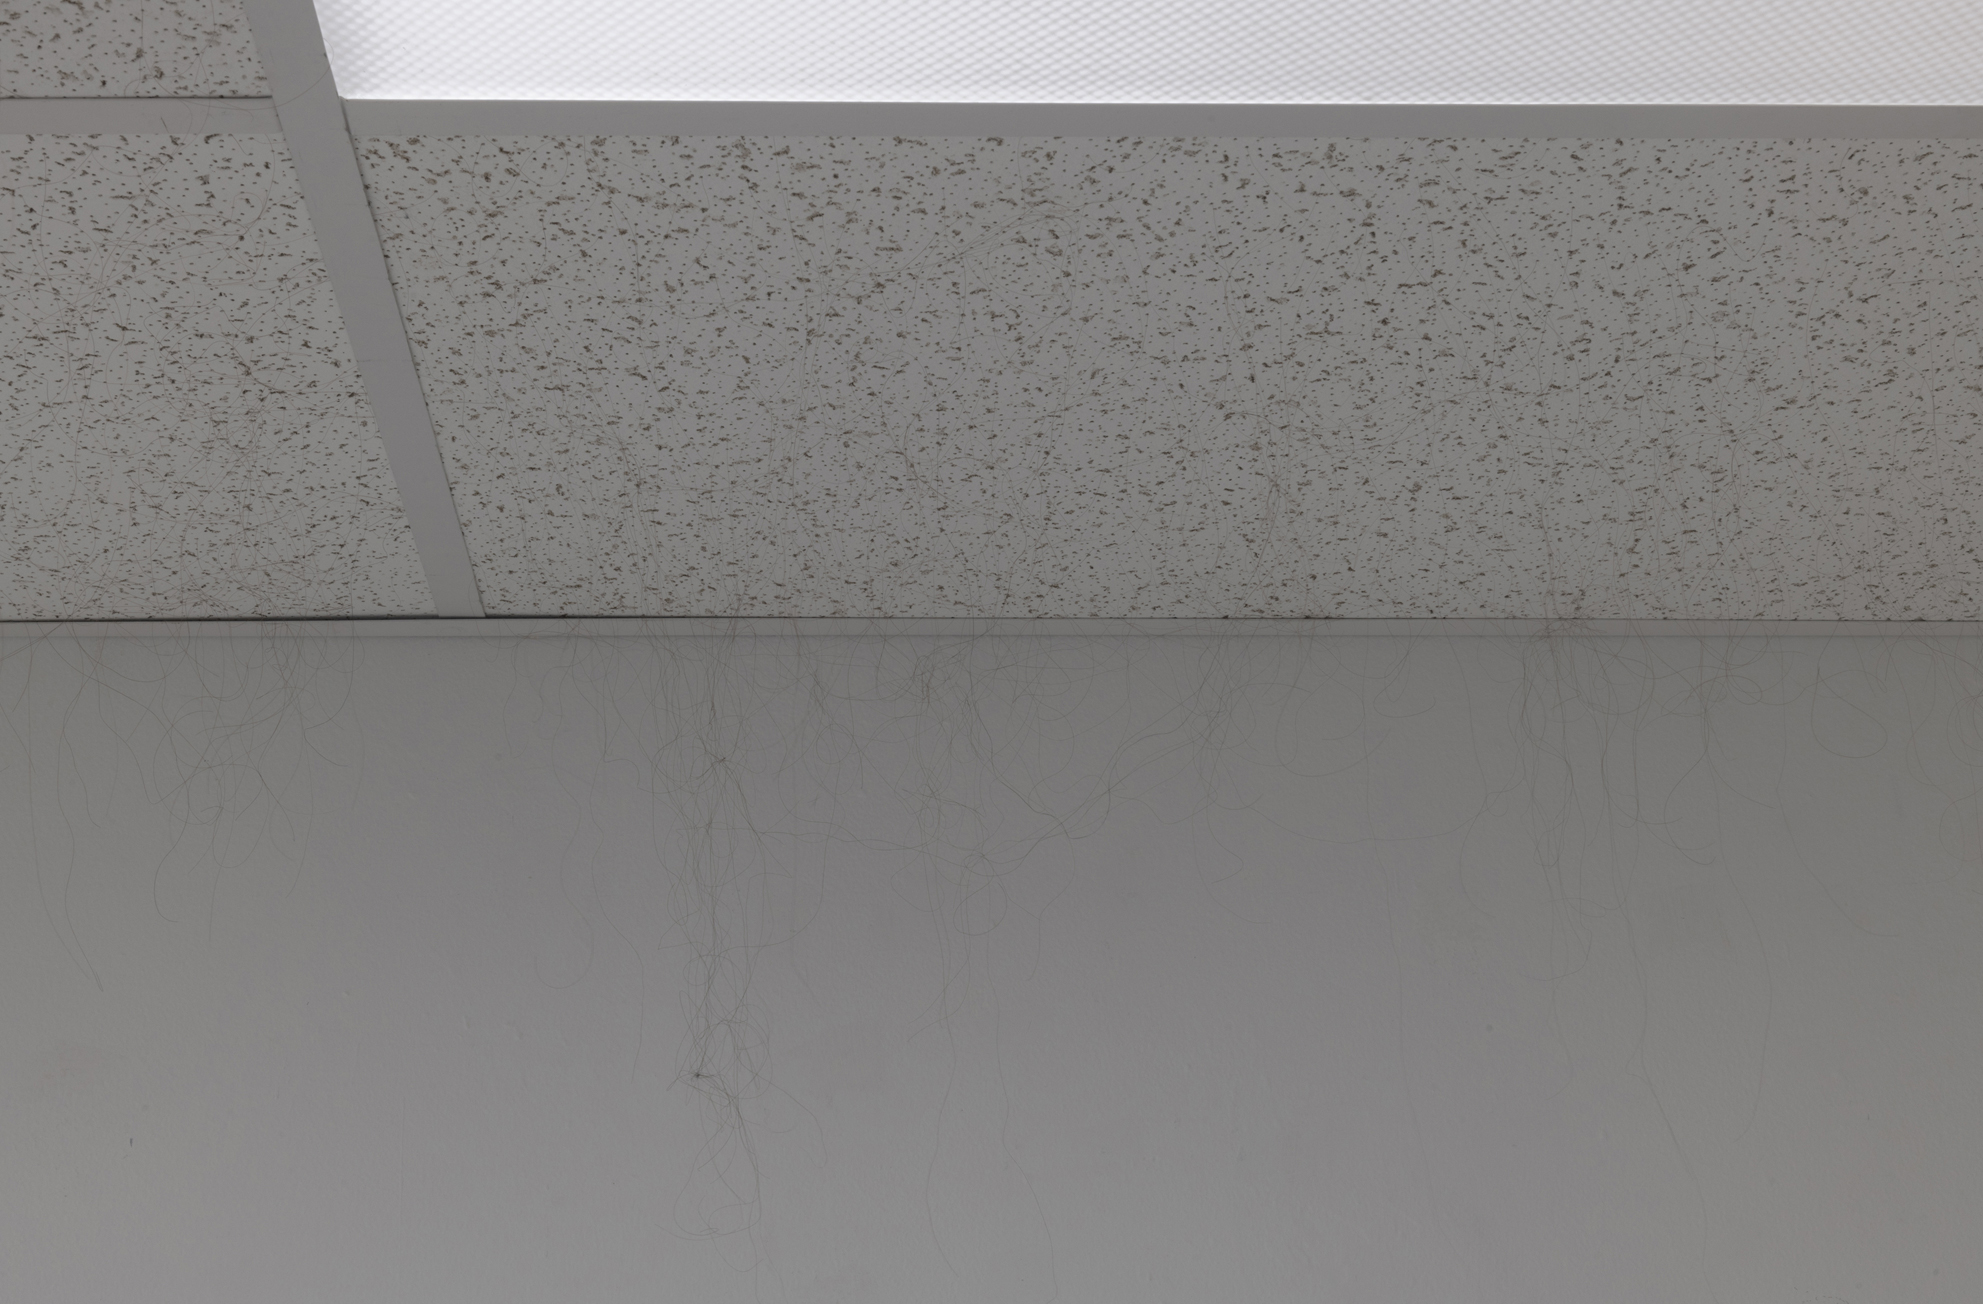   Anagen  (detail), 2018–19. Armstrong ceiling tiles in dropped ceiling in gallery, human hair, glue. 86 x 117 x 203 inches (approximately). 